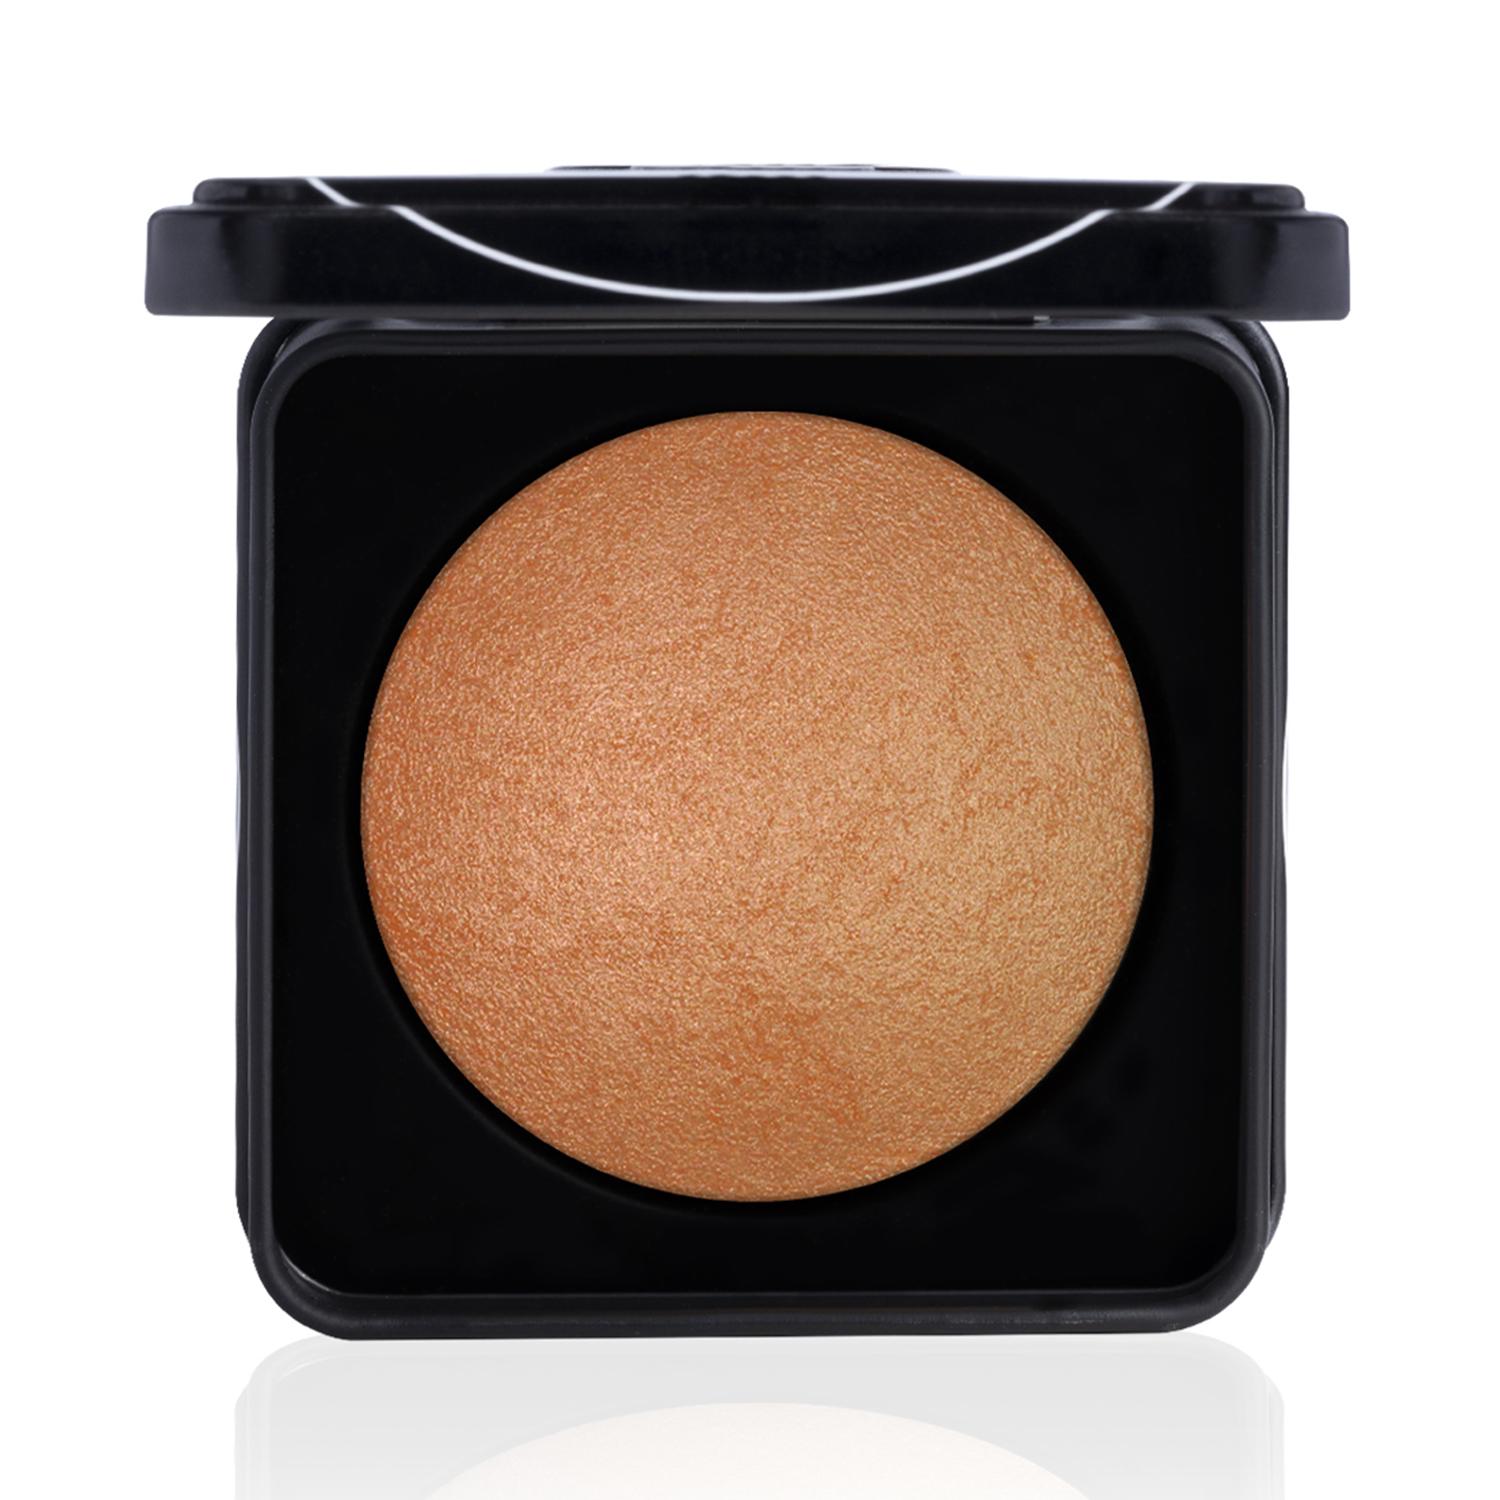 PAC | PAC Baked Highlighter - 06 Serving Glamour (7.5g)